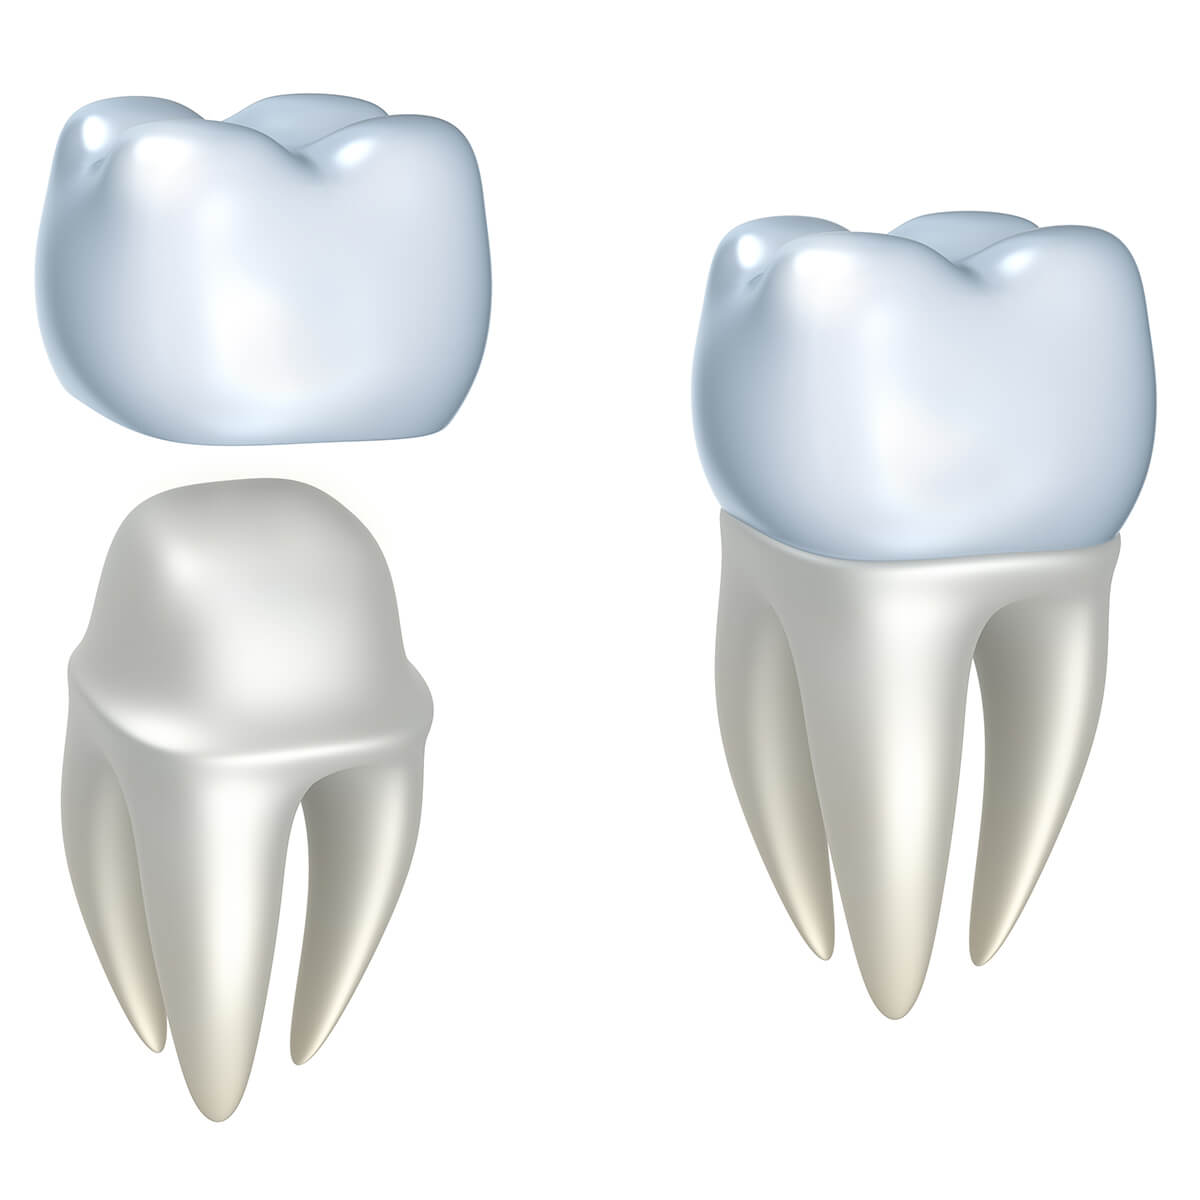 Reasons why a dentist might recommend dental crowns